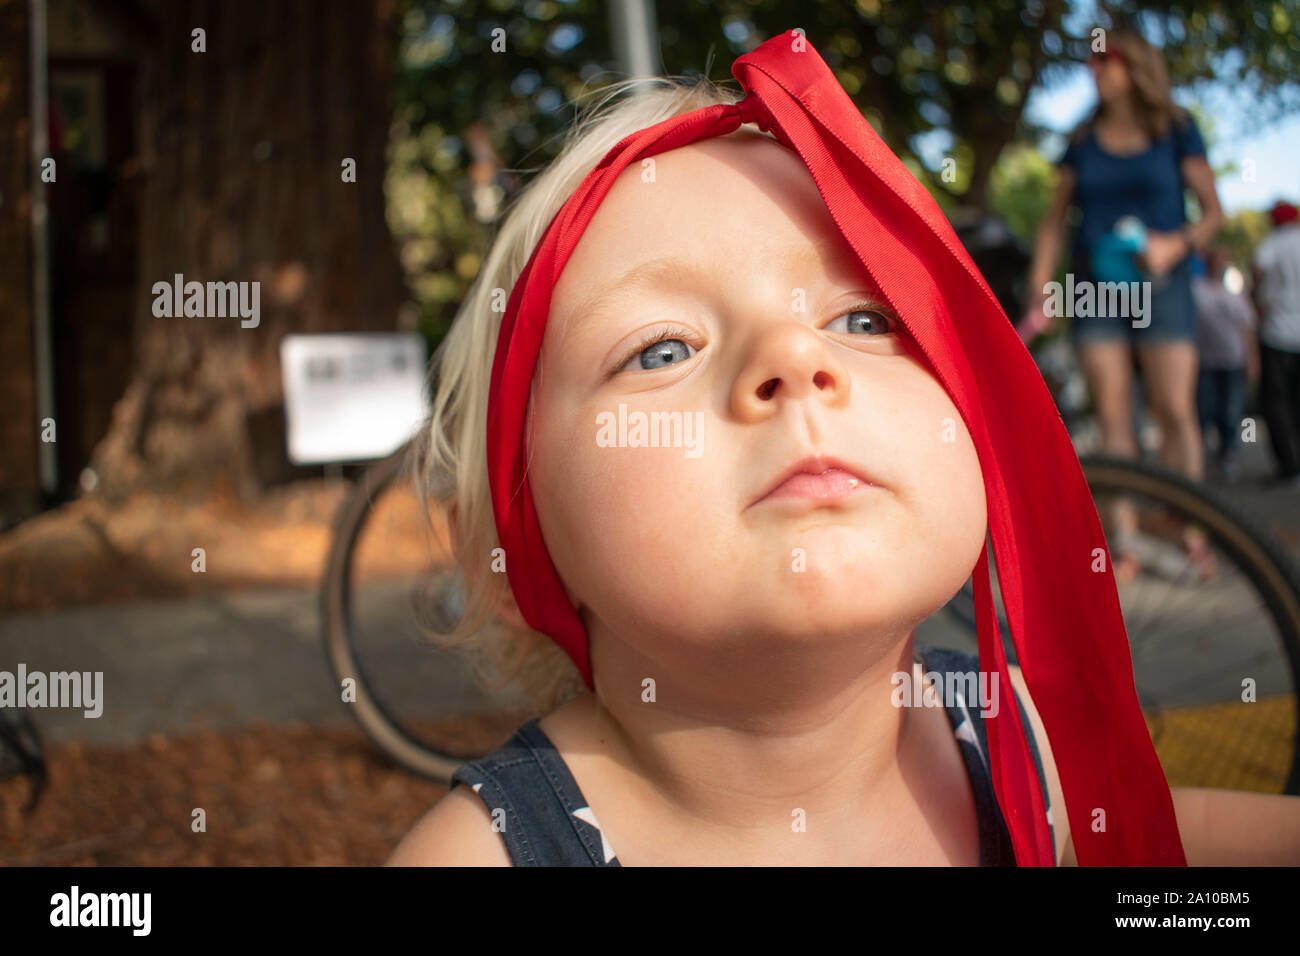 A young girl plays around with the ribbon on her head during a music festival in San Rafael, CA. Stock Photo